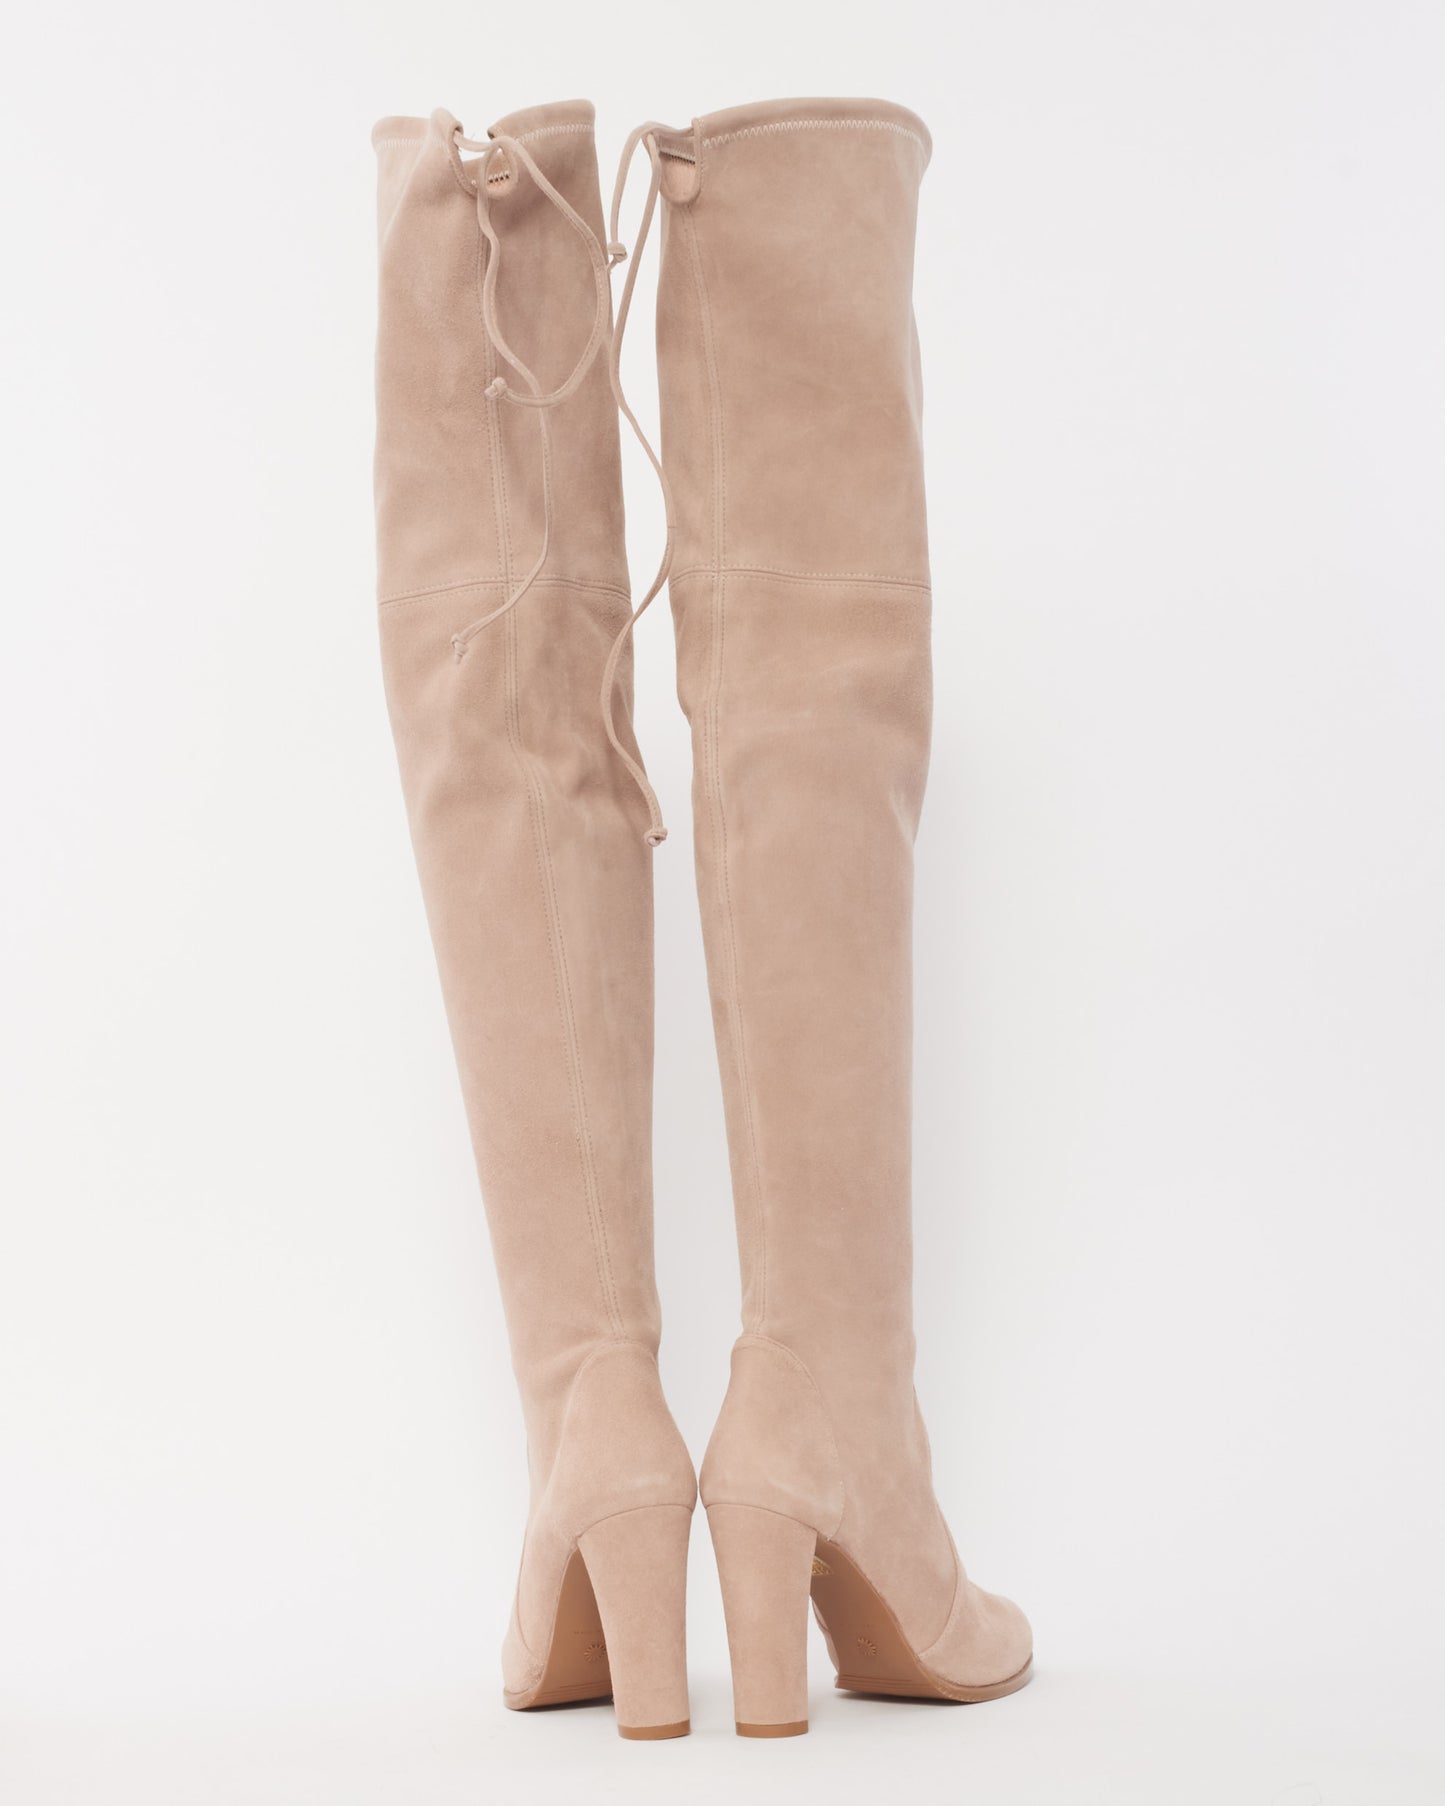 Stuart Weitzman Blush Suede Highland Over The Knee Boots - 37.5